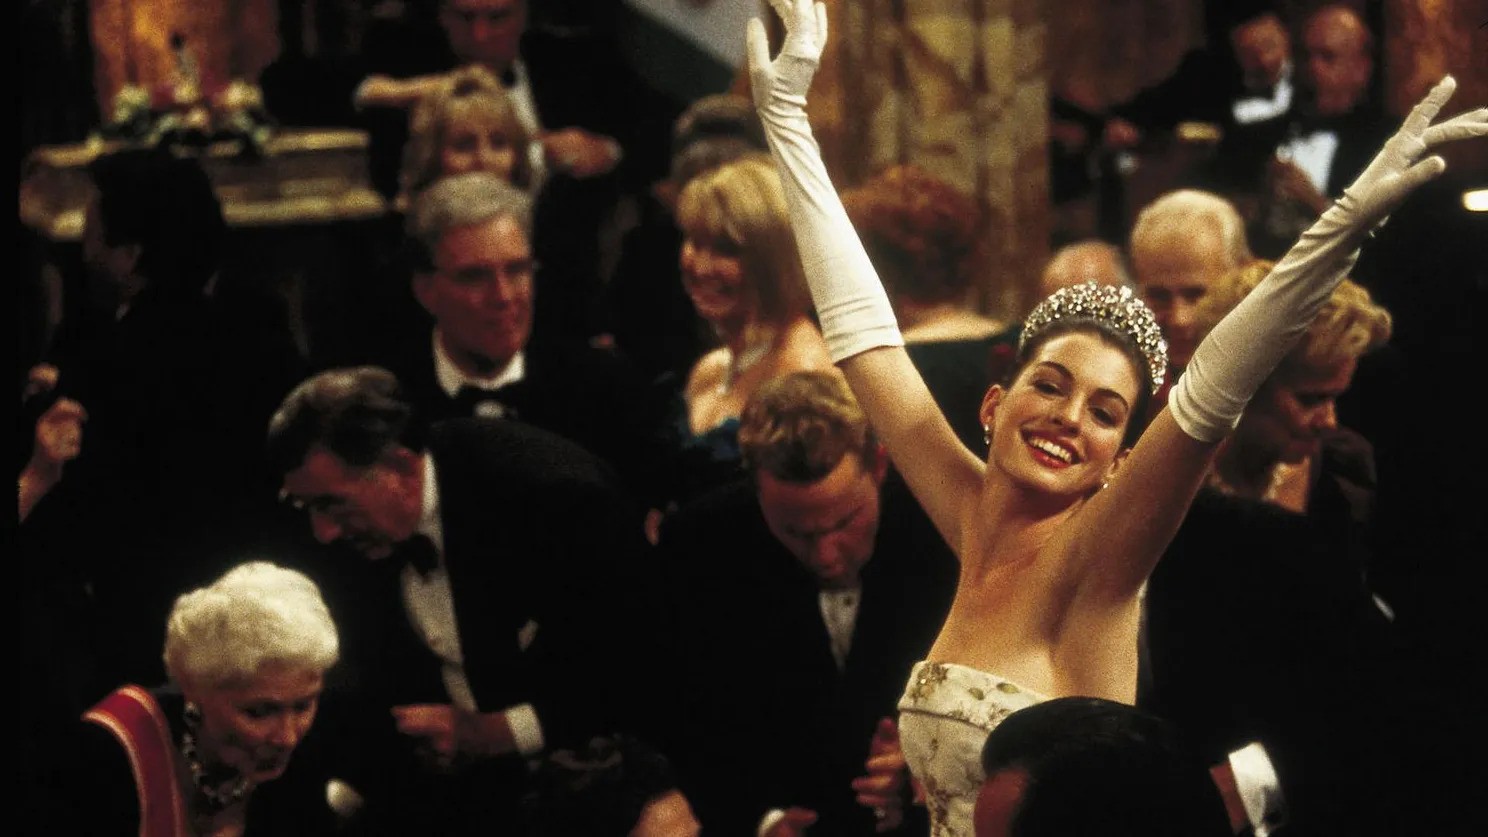 Anne Hathaway in The Princess Diaries [Credit: Walt Disney Pictures]